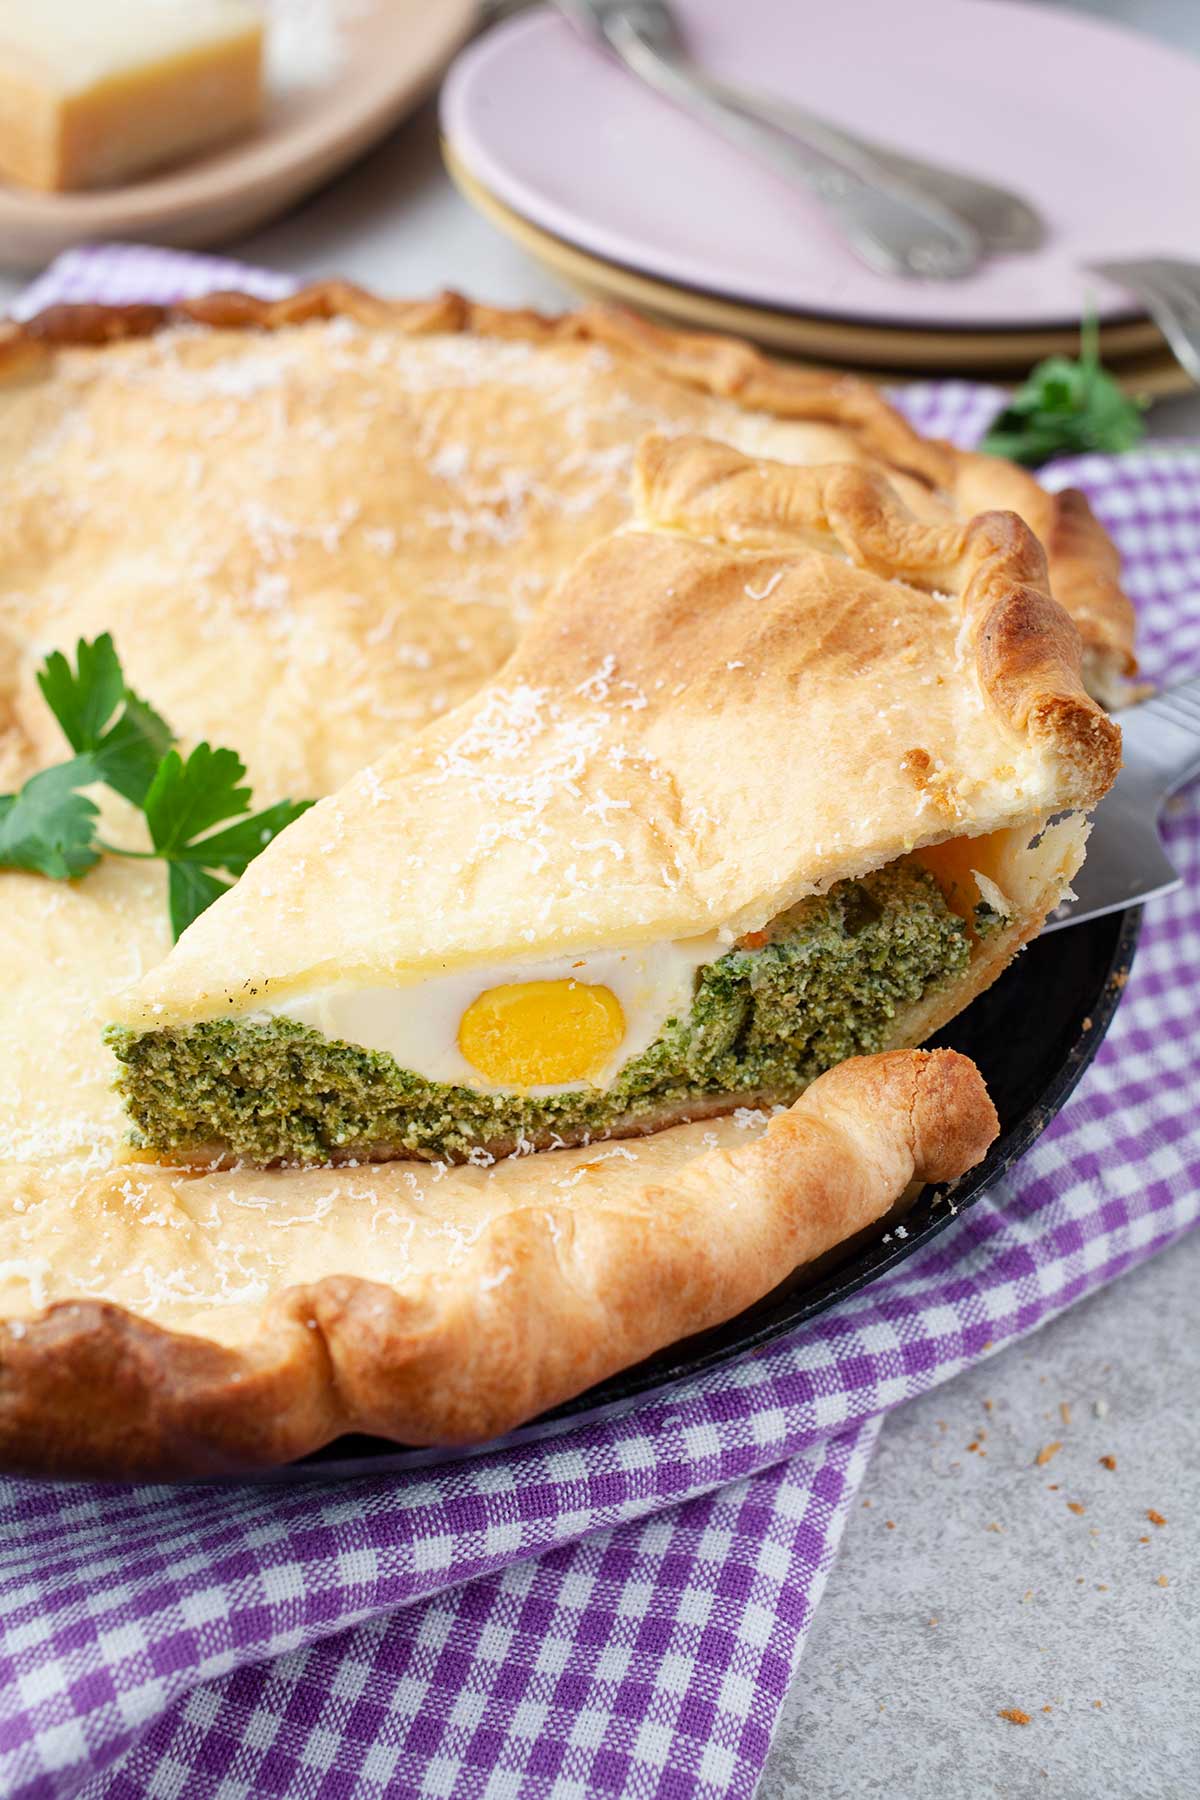 Italian Easter Pie with Spinach Torta Pasqualina Recipe